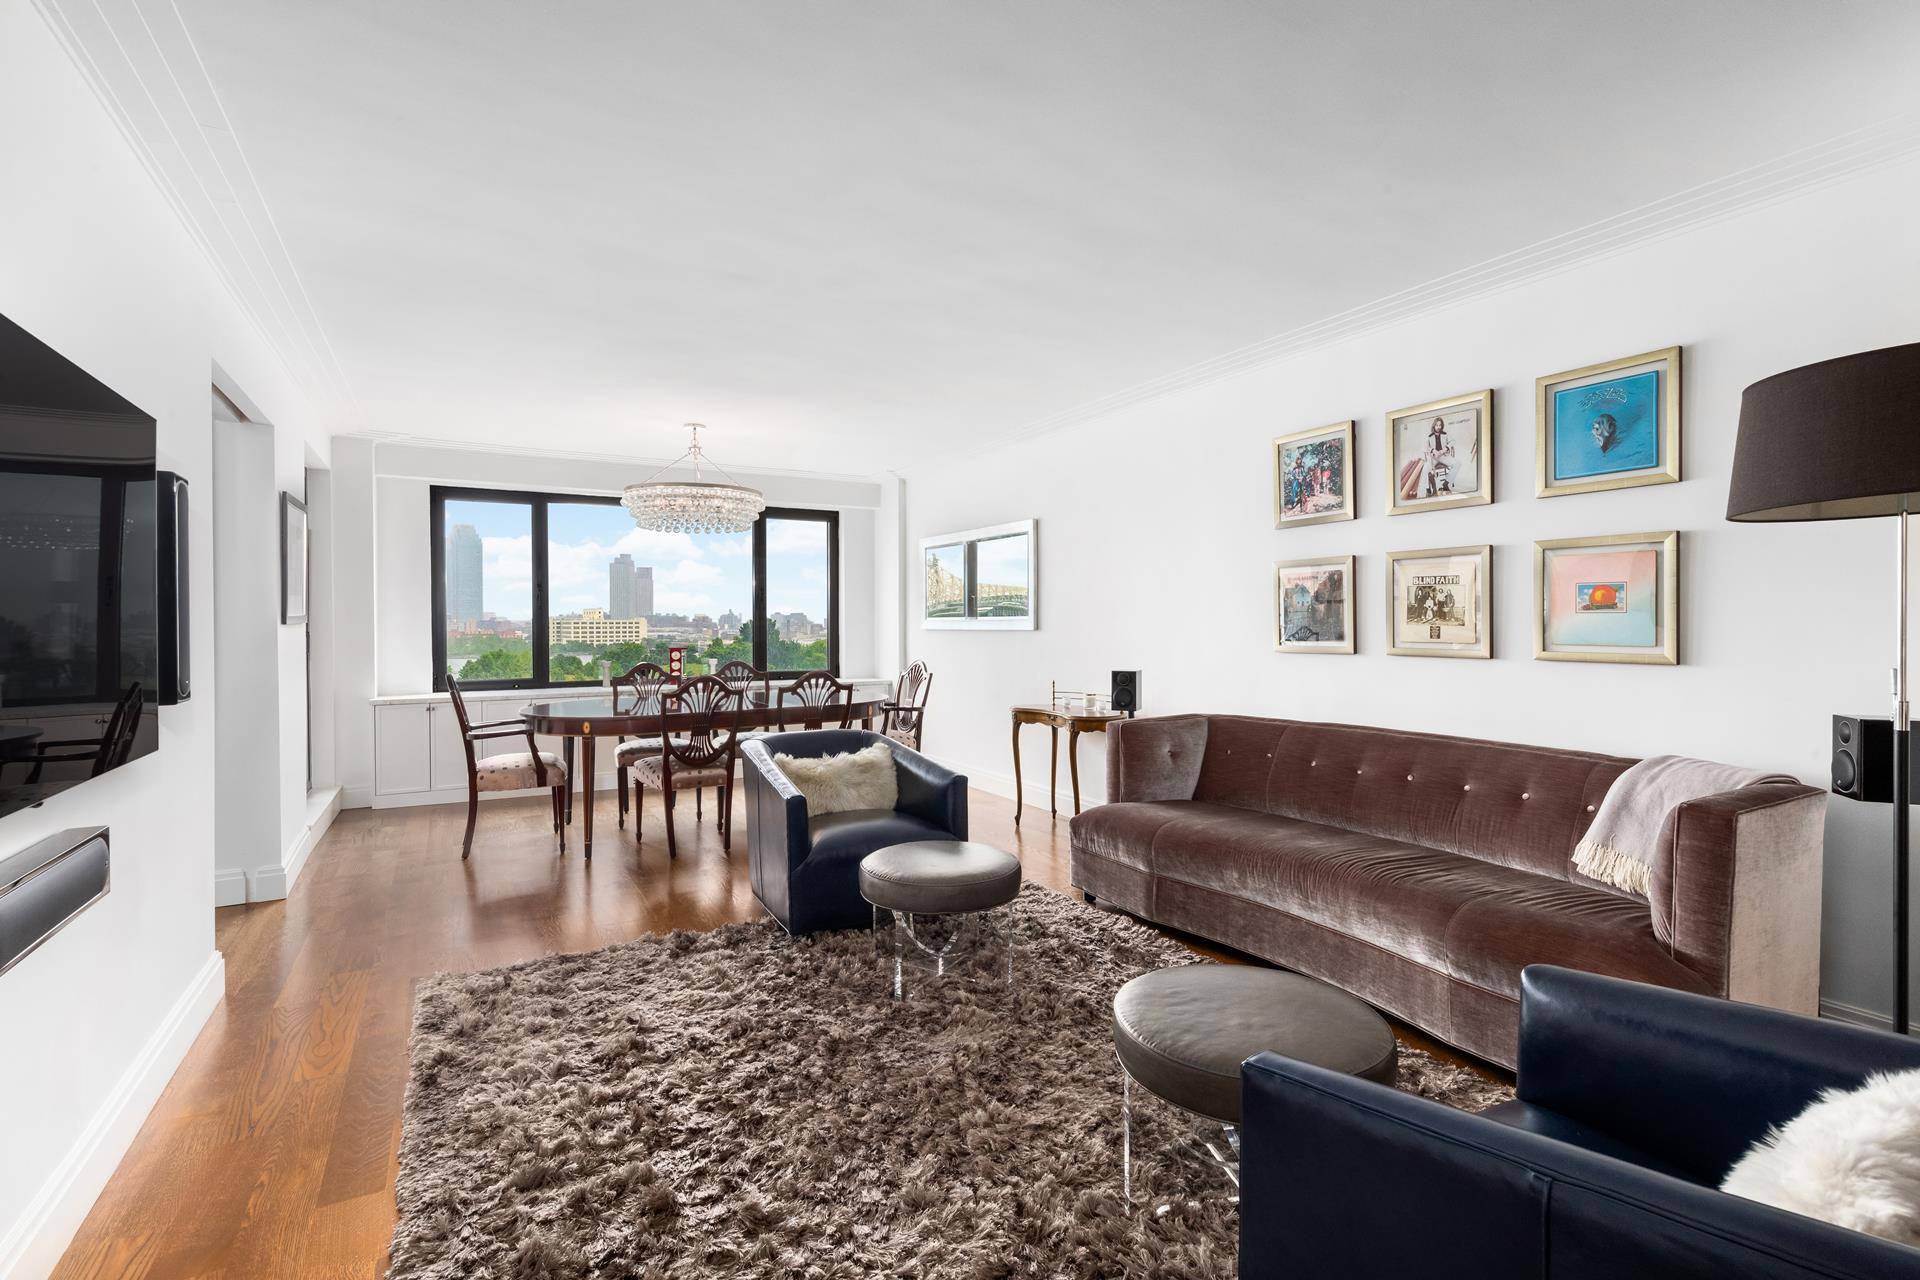 This glorious 2 bedroom, 2 bathroom Sutton Place home with stunning East River Views has been completely gut renovated with 1st Class finishes.